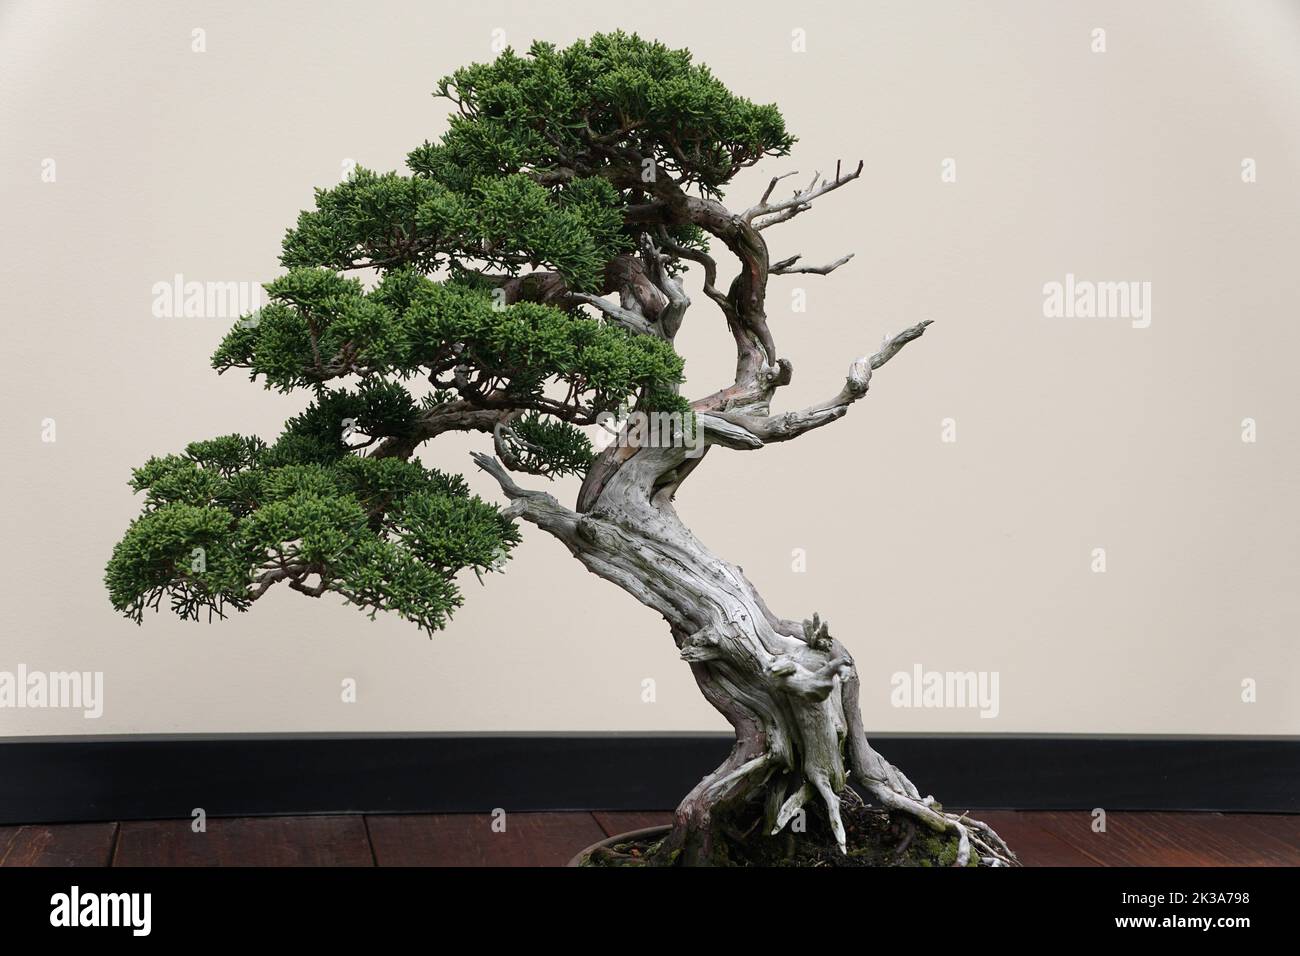 A beautiful and trained Sargent Juniper bonsai tree with green leaves Stock Photo